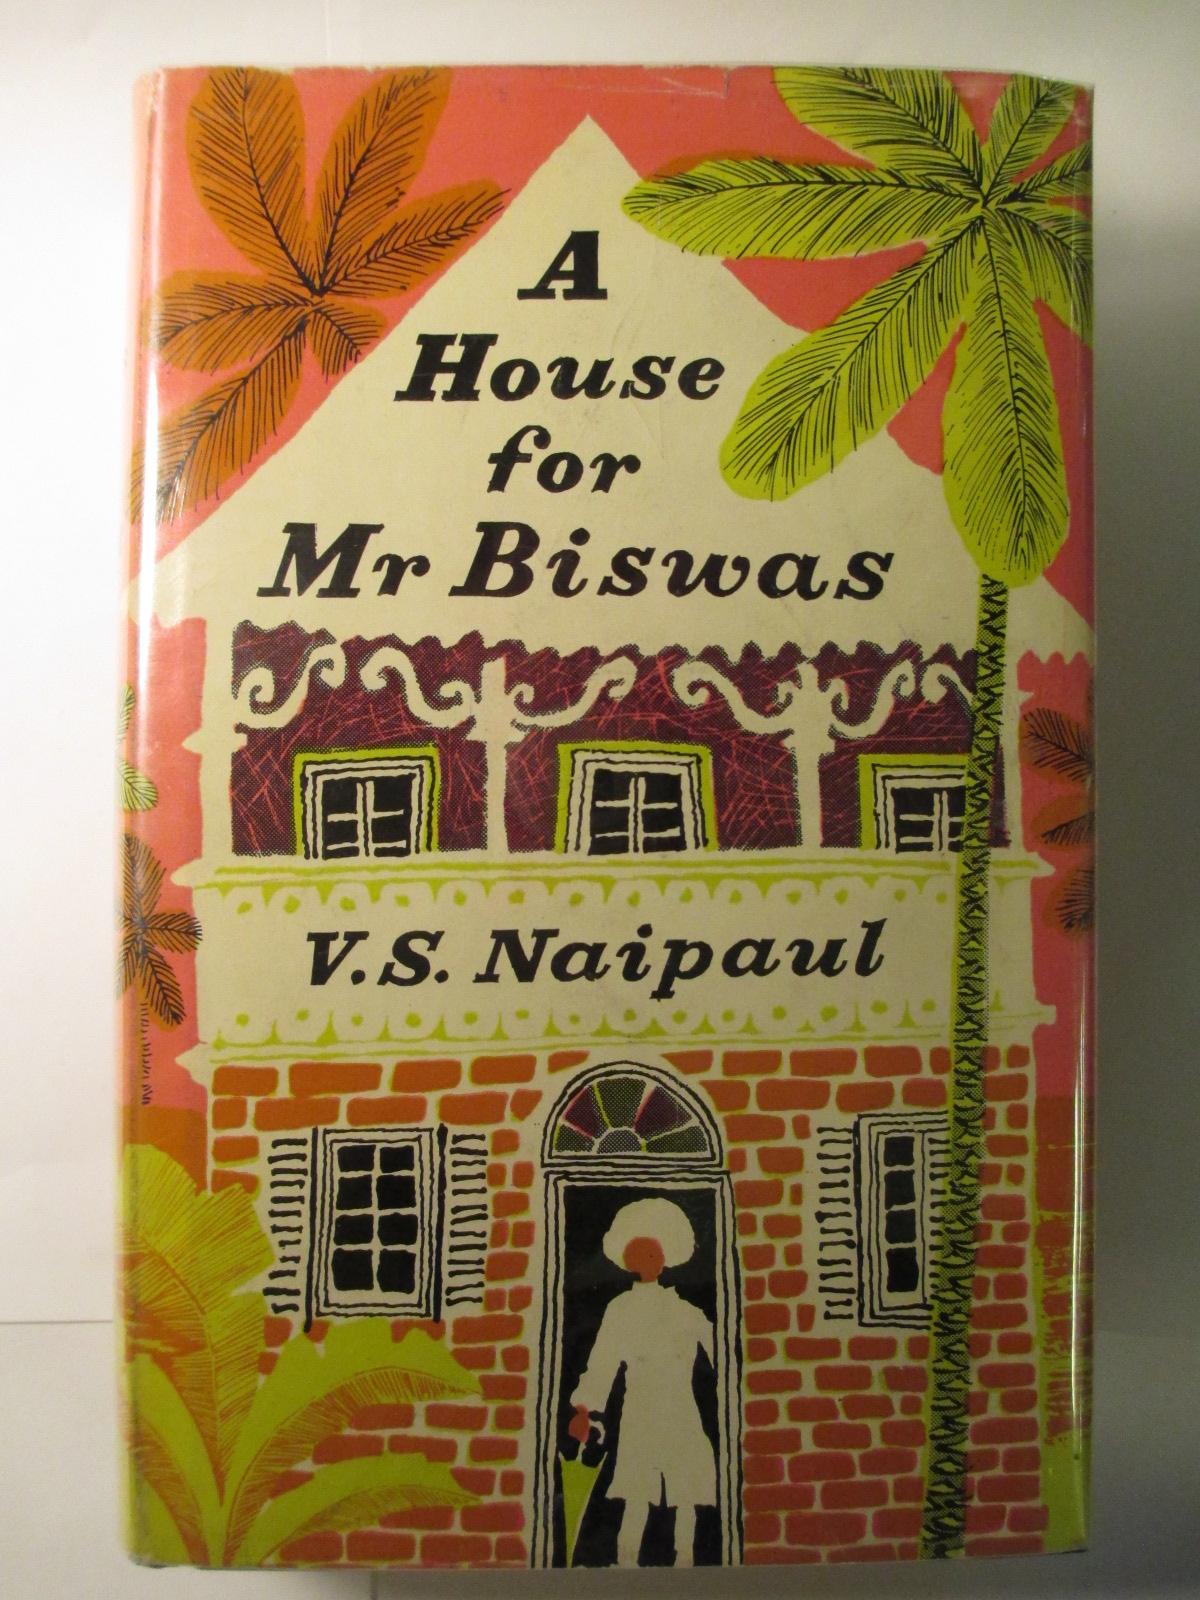 Product Image for A HOUSE FOR MR. BISWAS